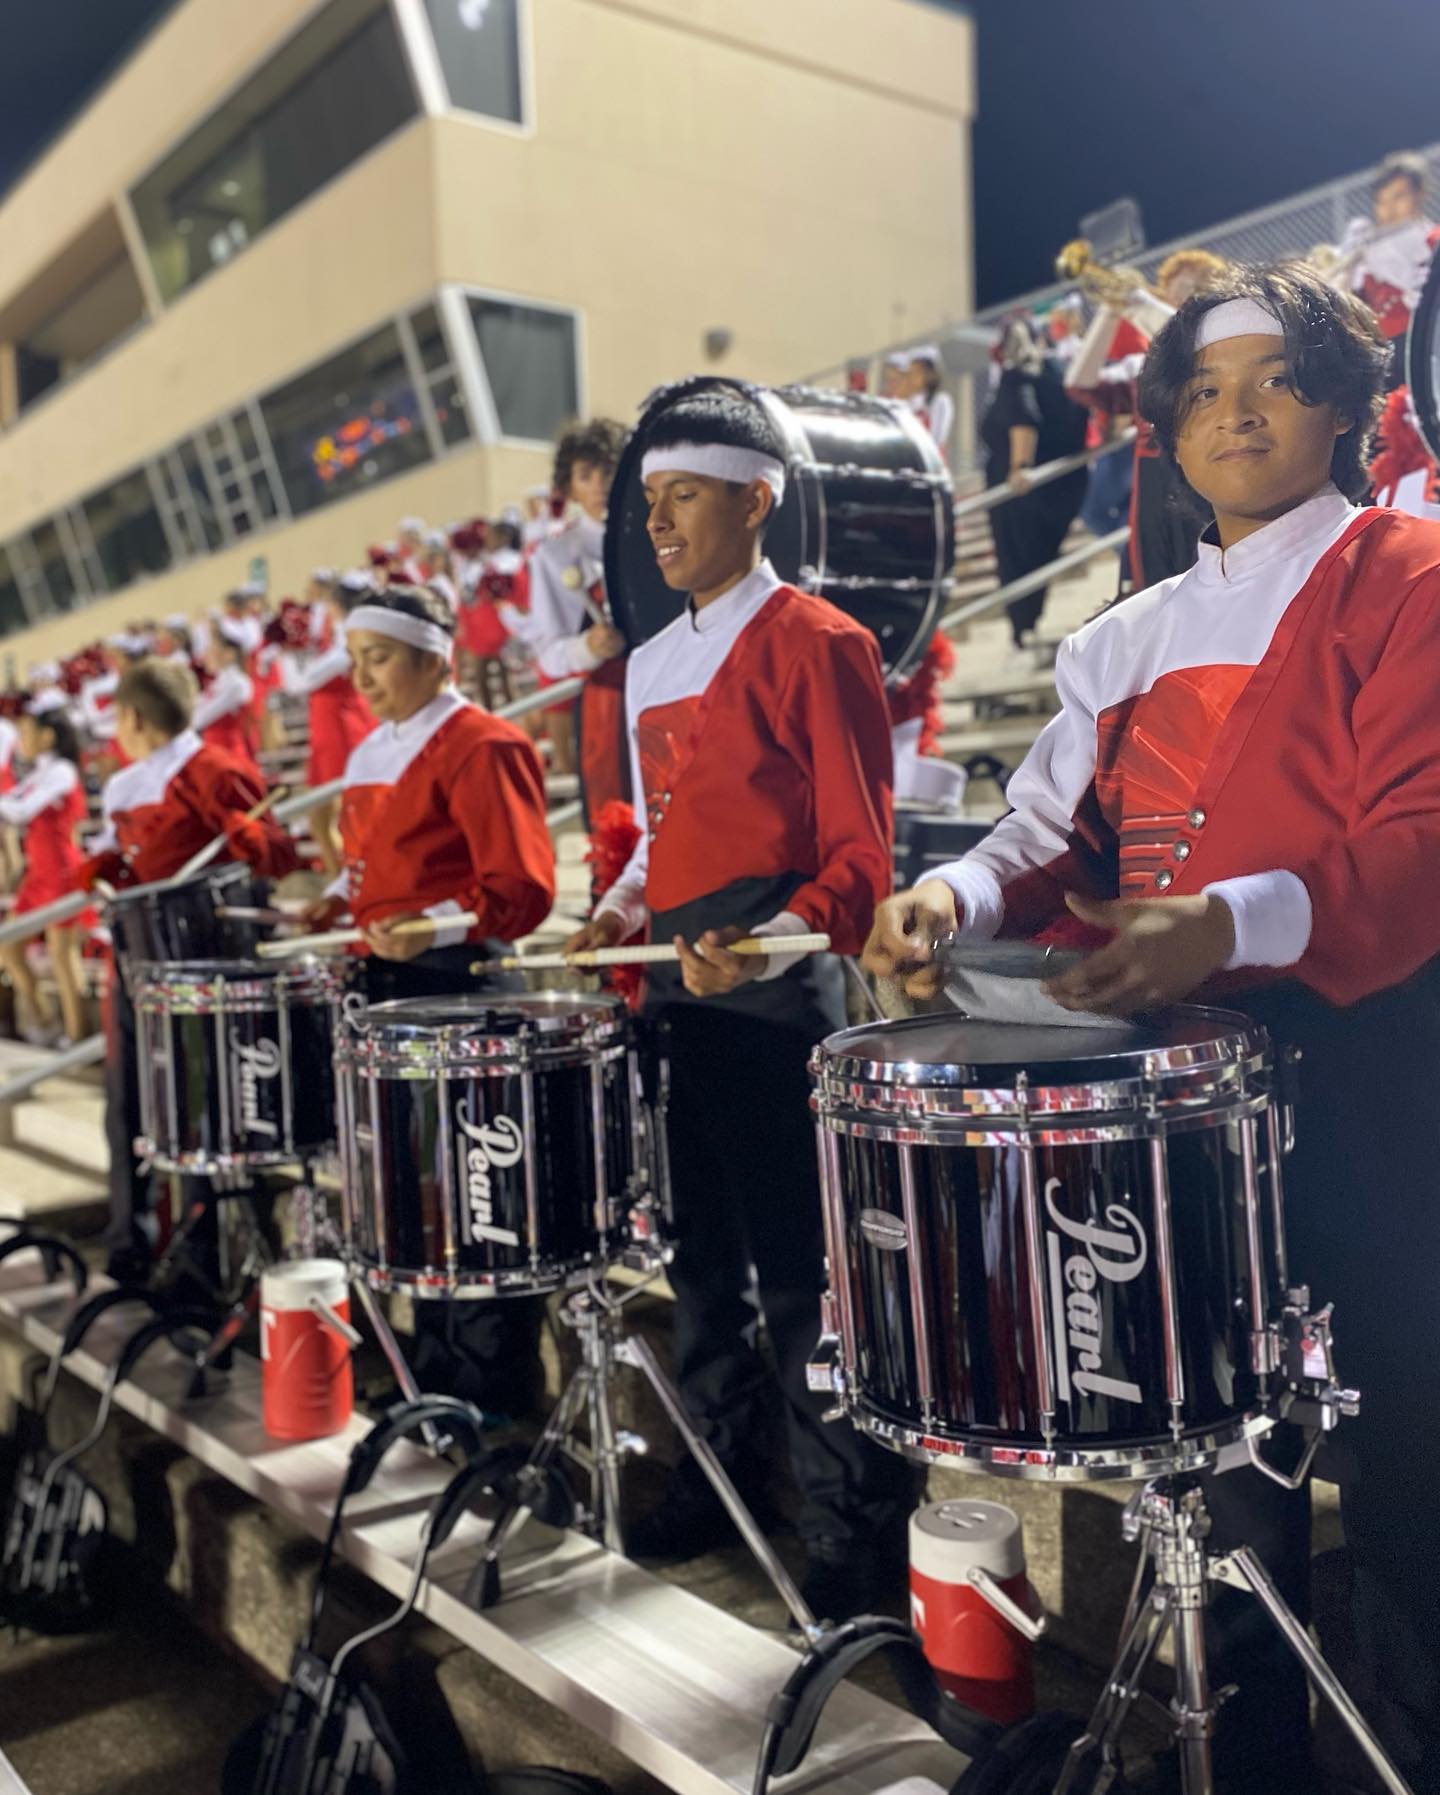 Taft band drumline students standing on bleachers with drums at football game